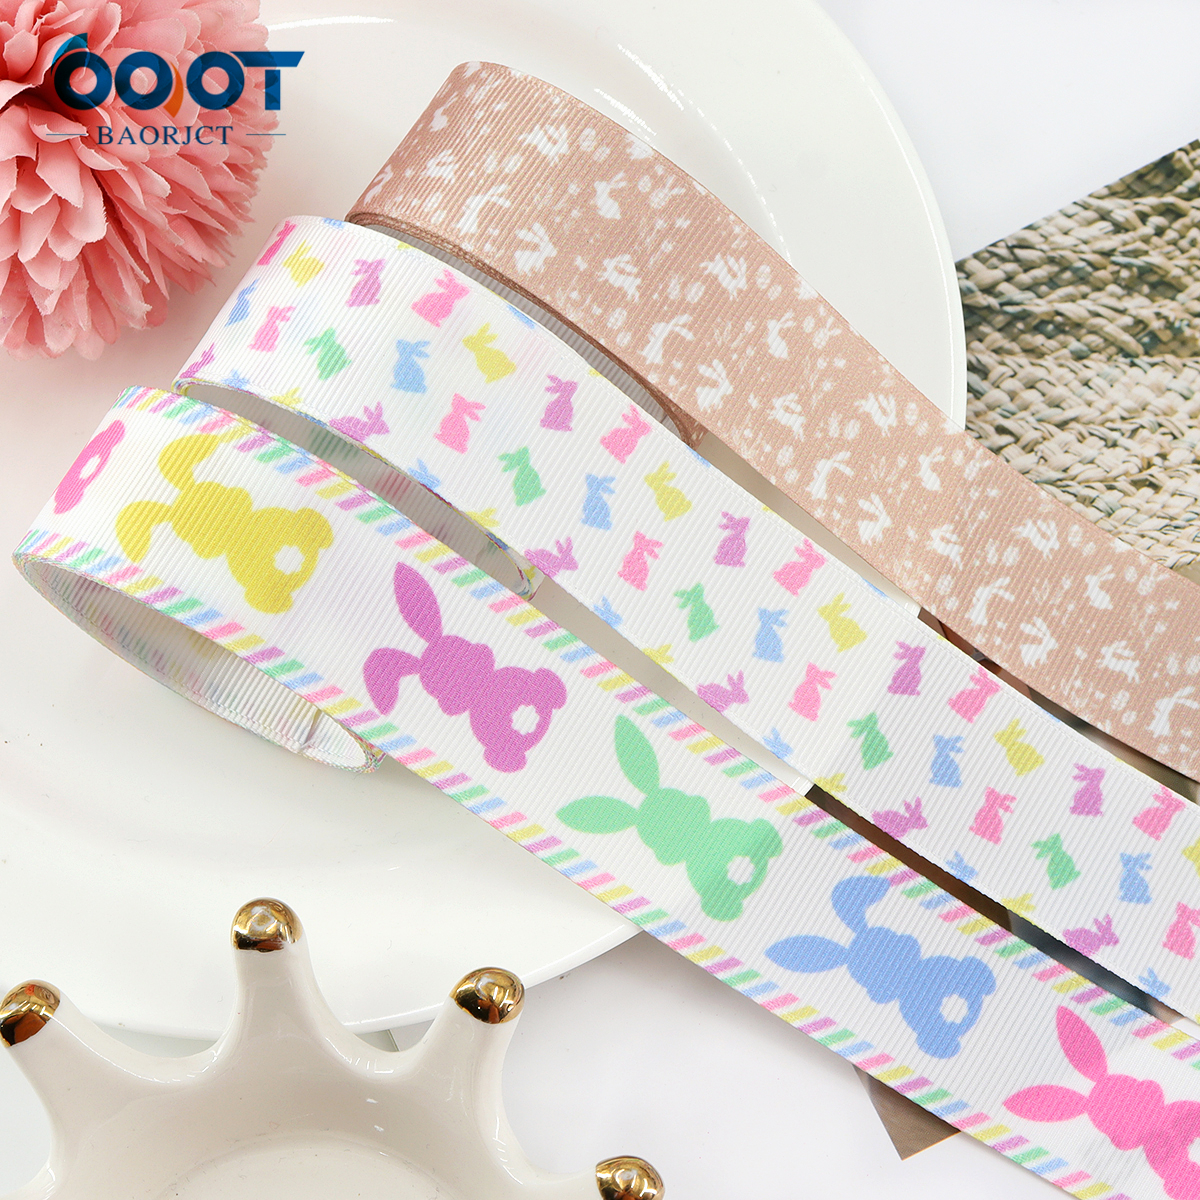 Easter Day Thermal Transfer Printed Grosgrain Ribbons,25mm 10Yards 221205-1 Gift Wrap Bow Cap DIY Accessories Decorations